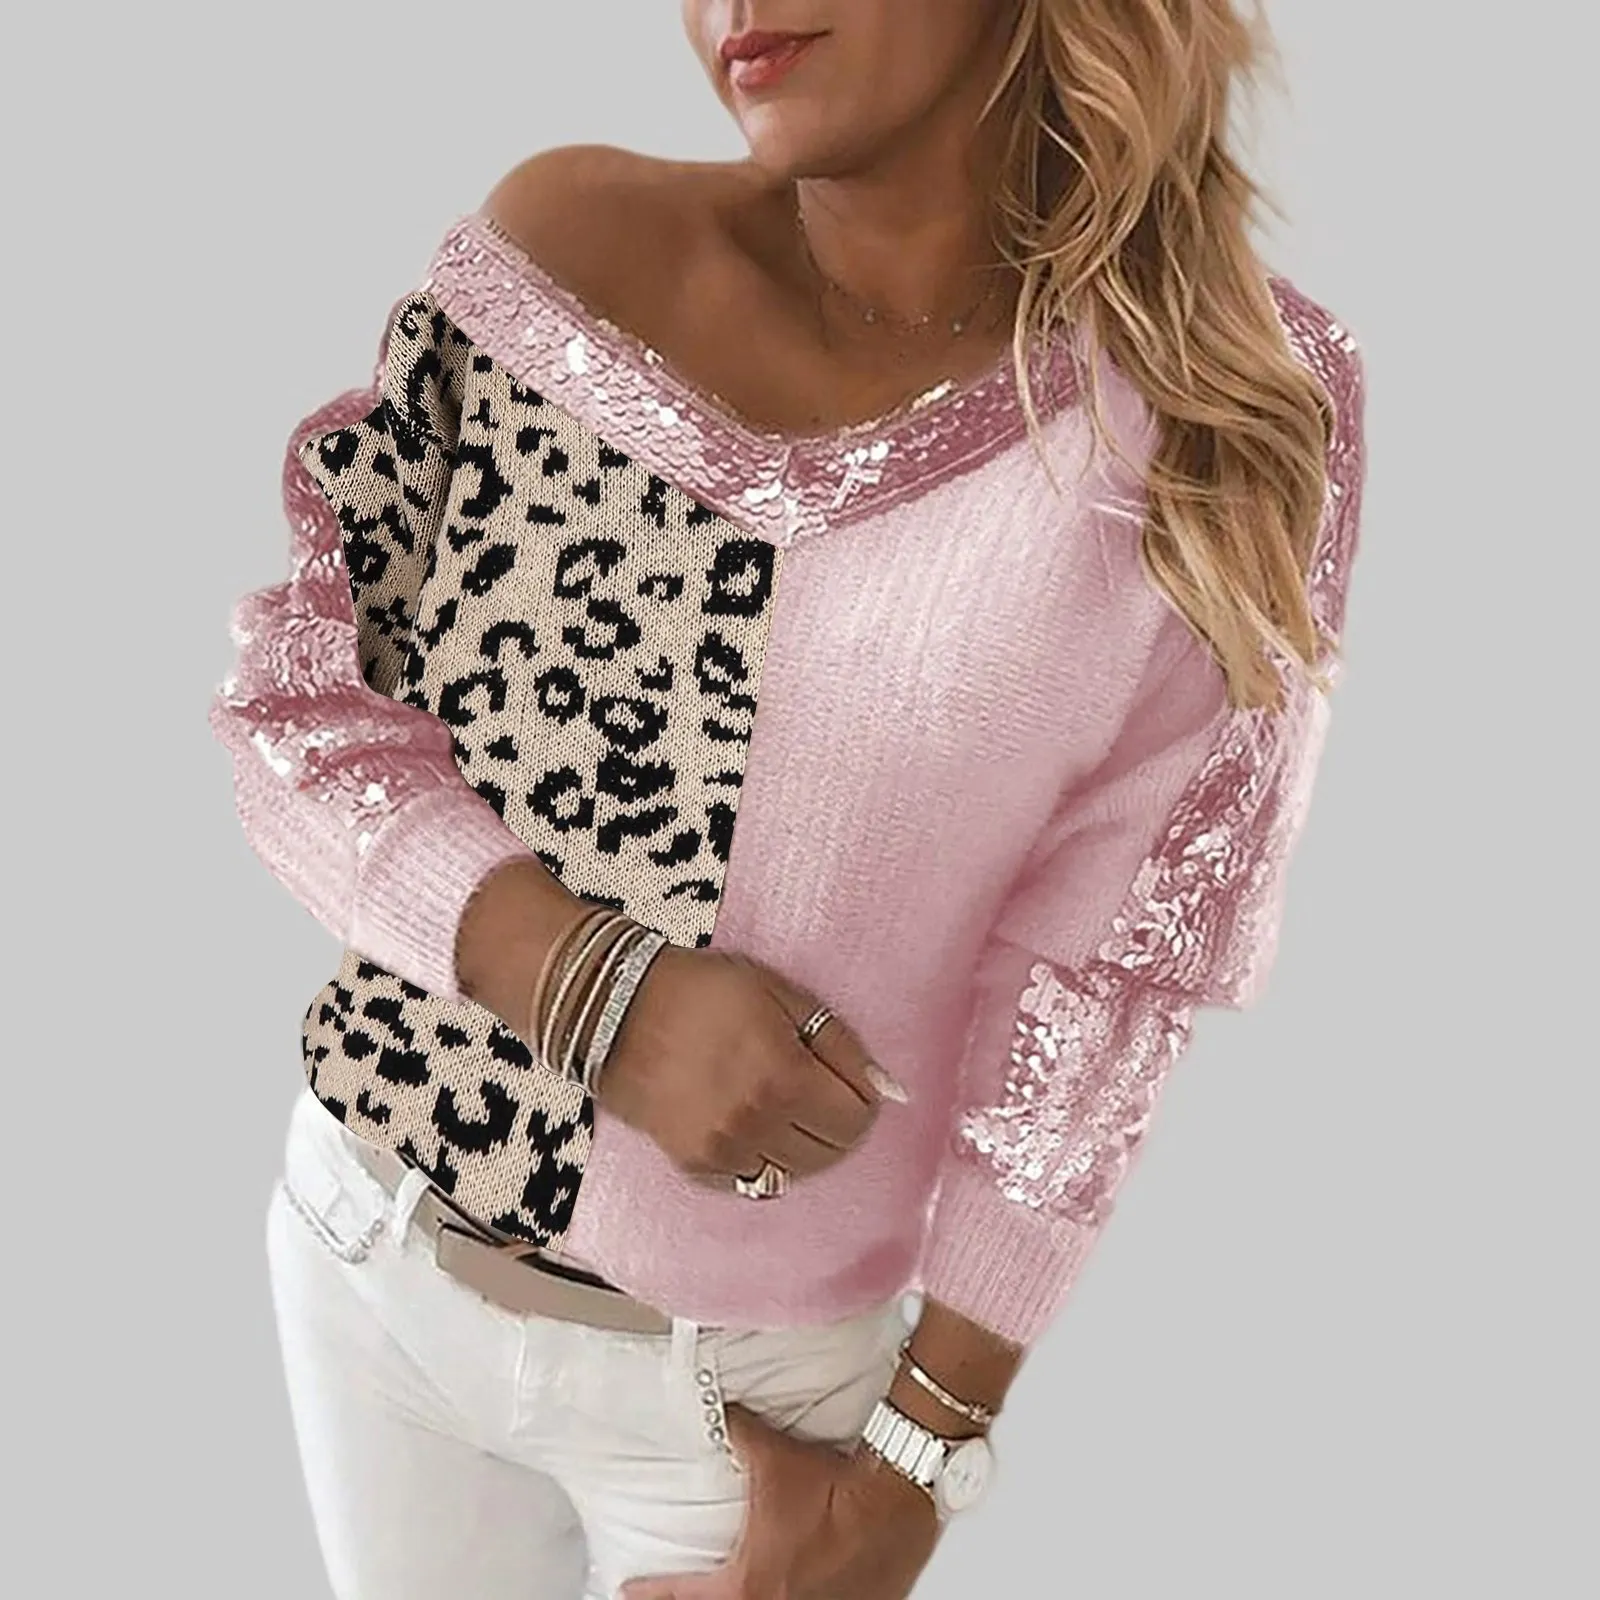 QNPQYX New Elegant Loose Soft Female Knitwear Sweaters Pullovers Women Sweater Sequin Stitching Leopard Print Pullovers Long Sleeve Jumpers